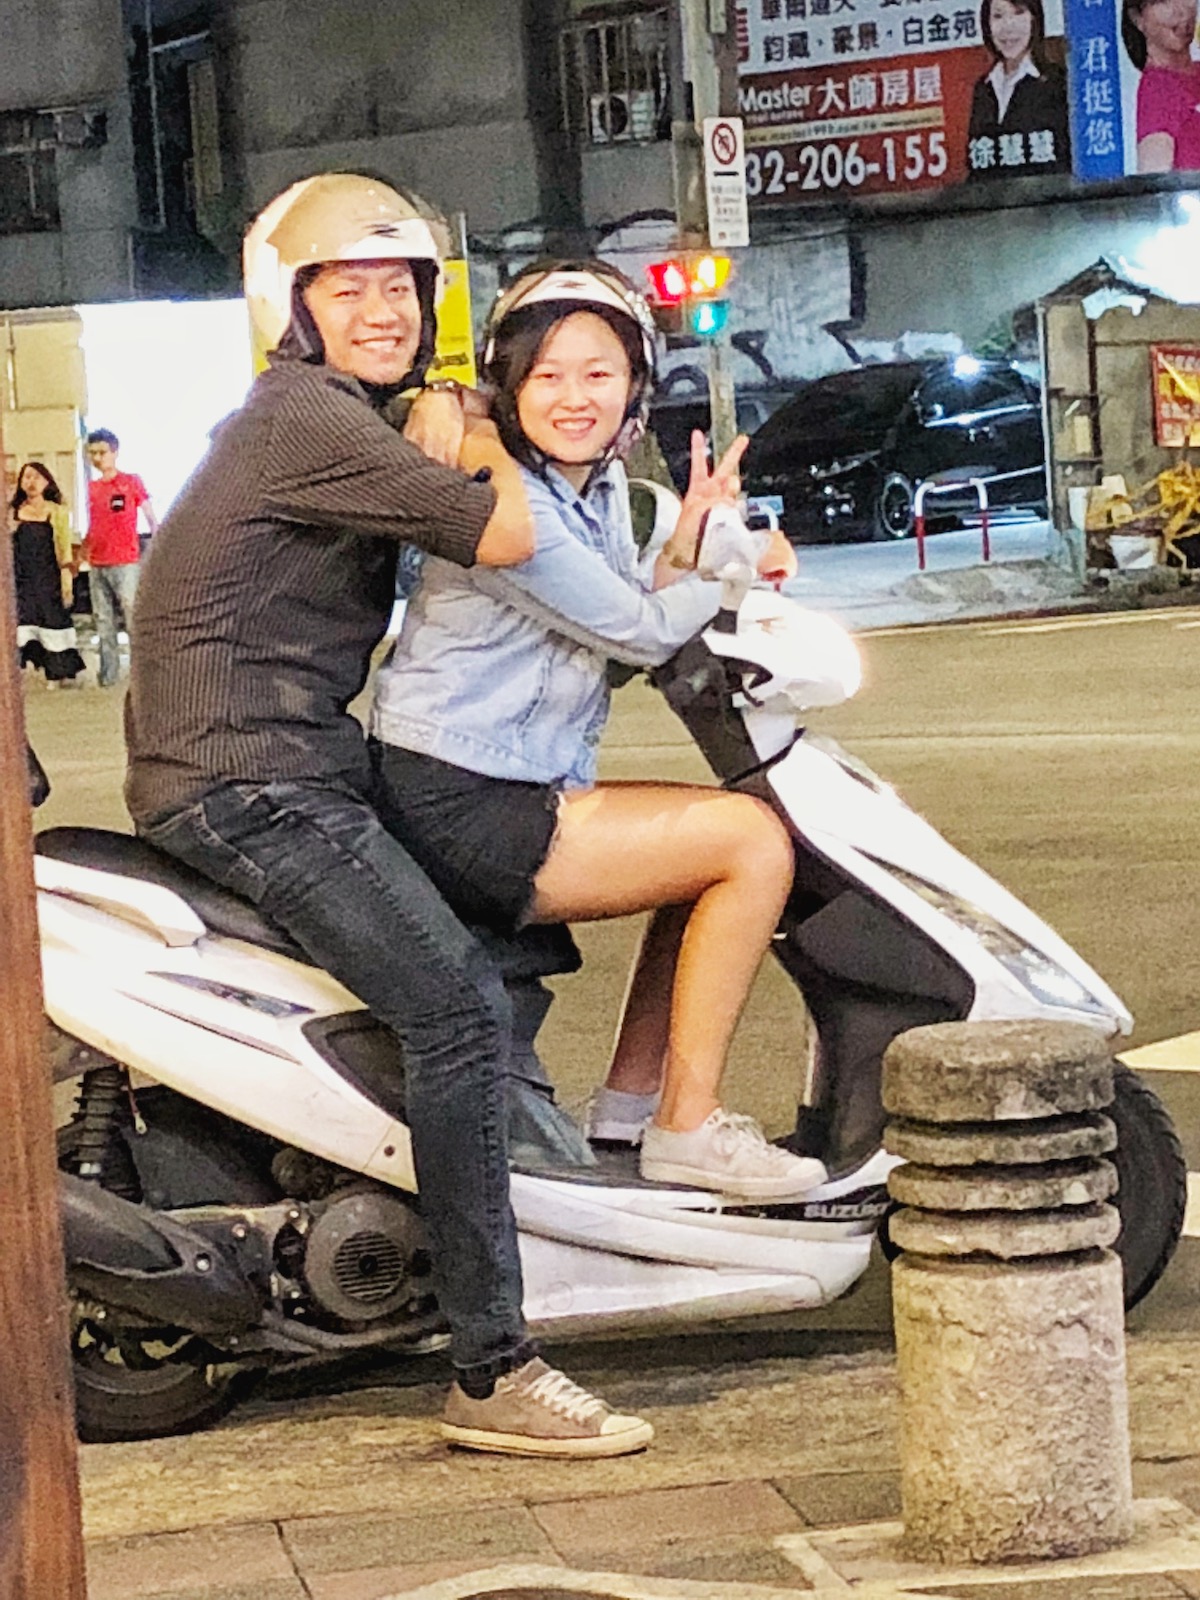 An Asian man and woman smile on a white scooter